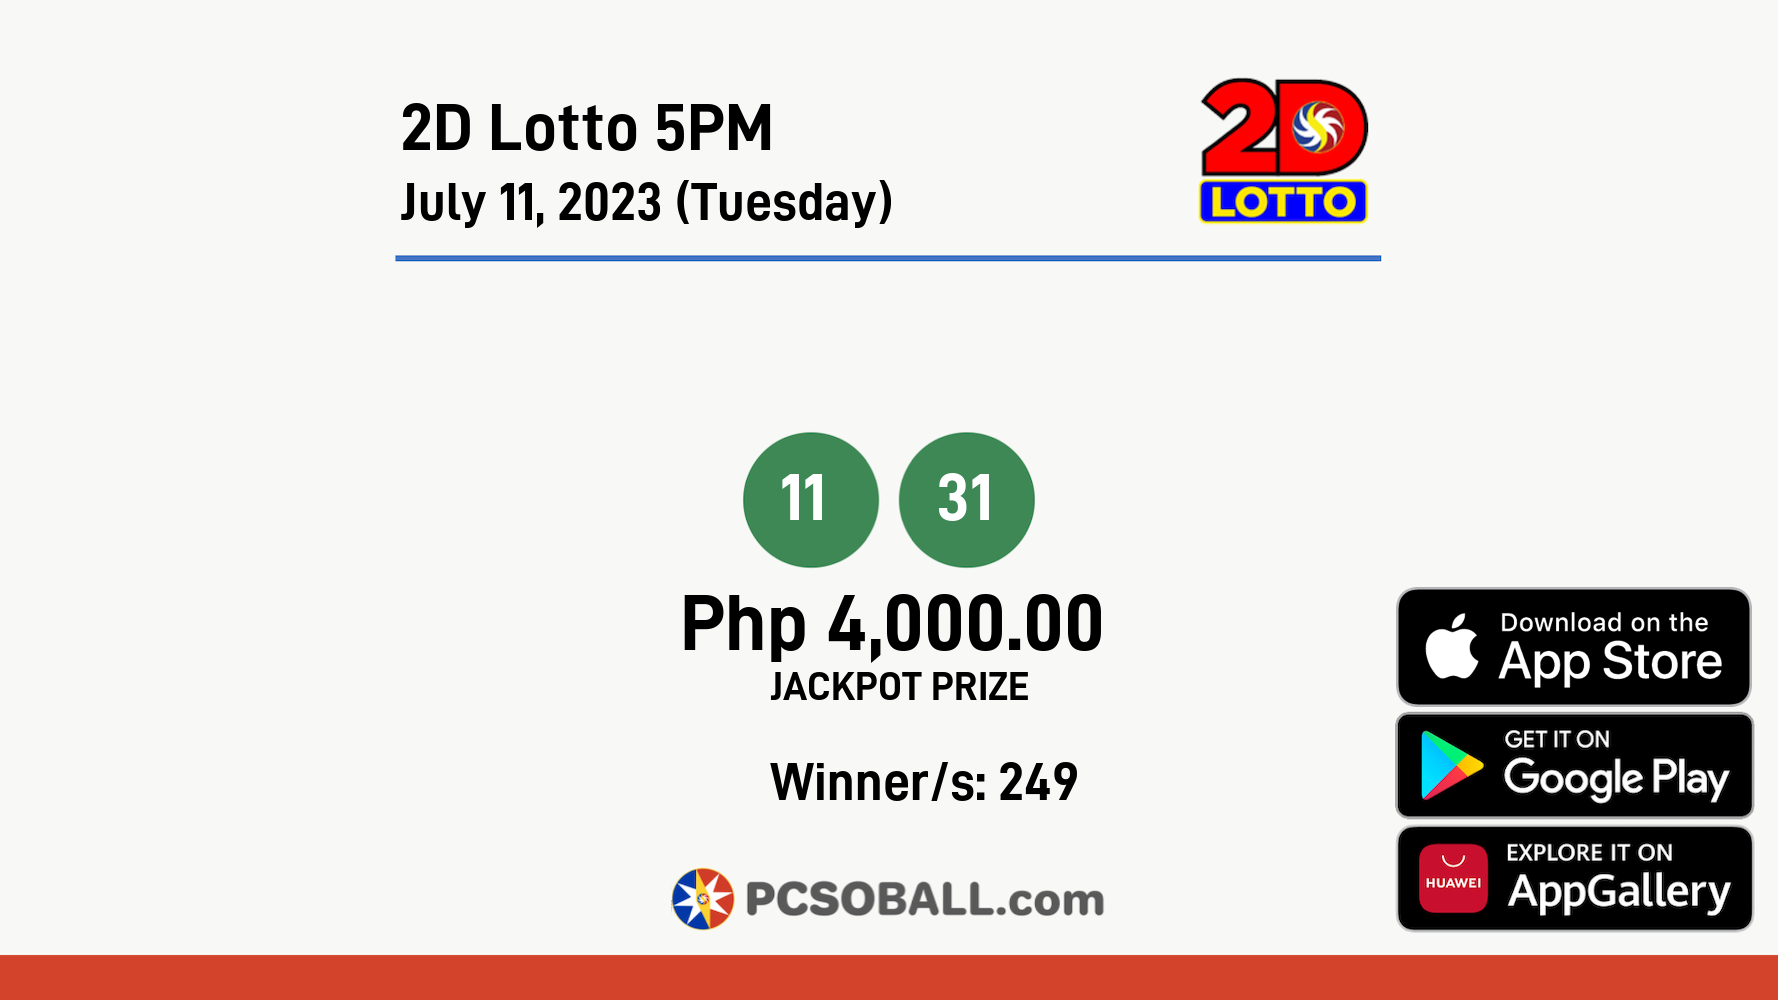 2D Lotto 5PM July 11, 2023 (Tuesday) Result